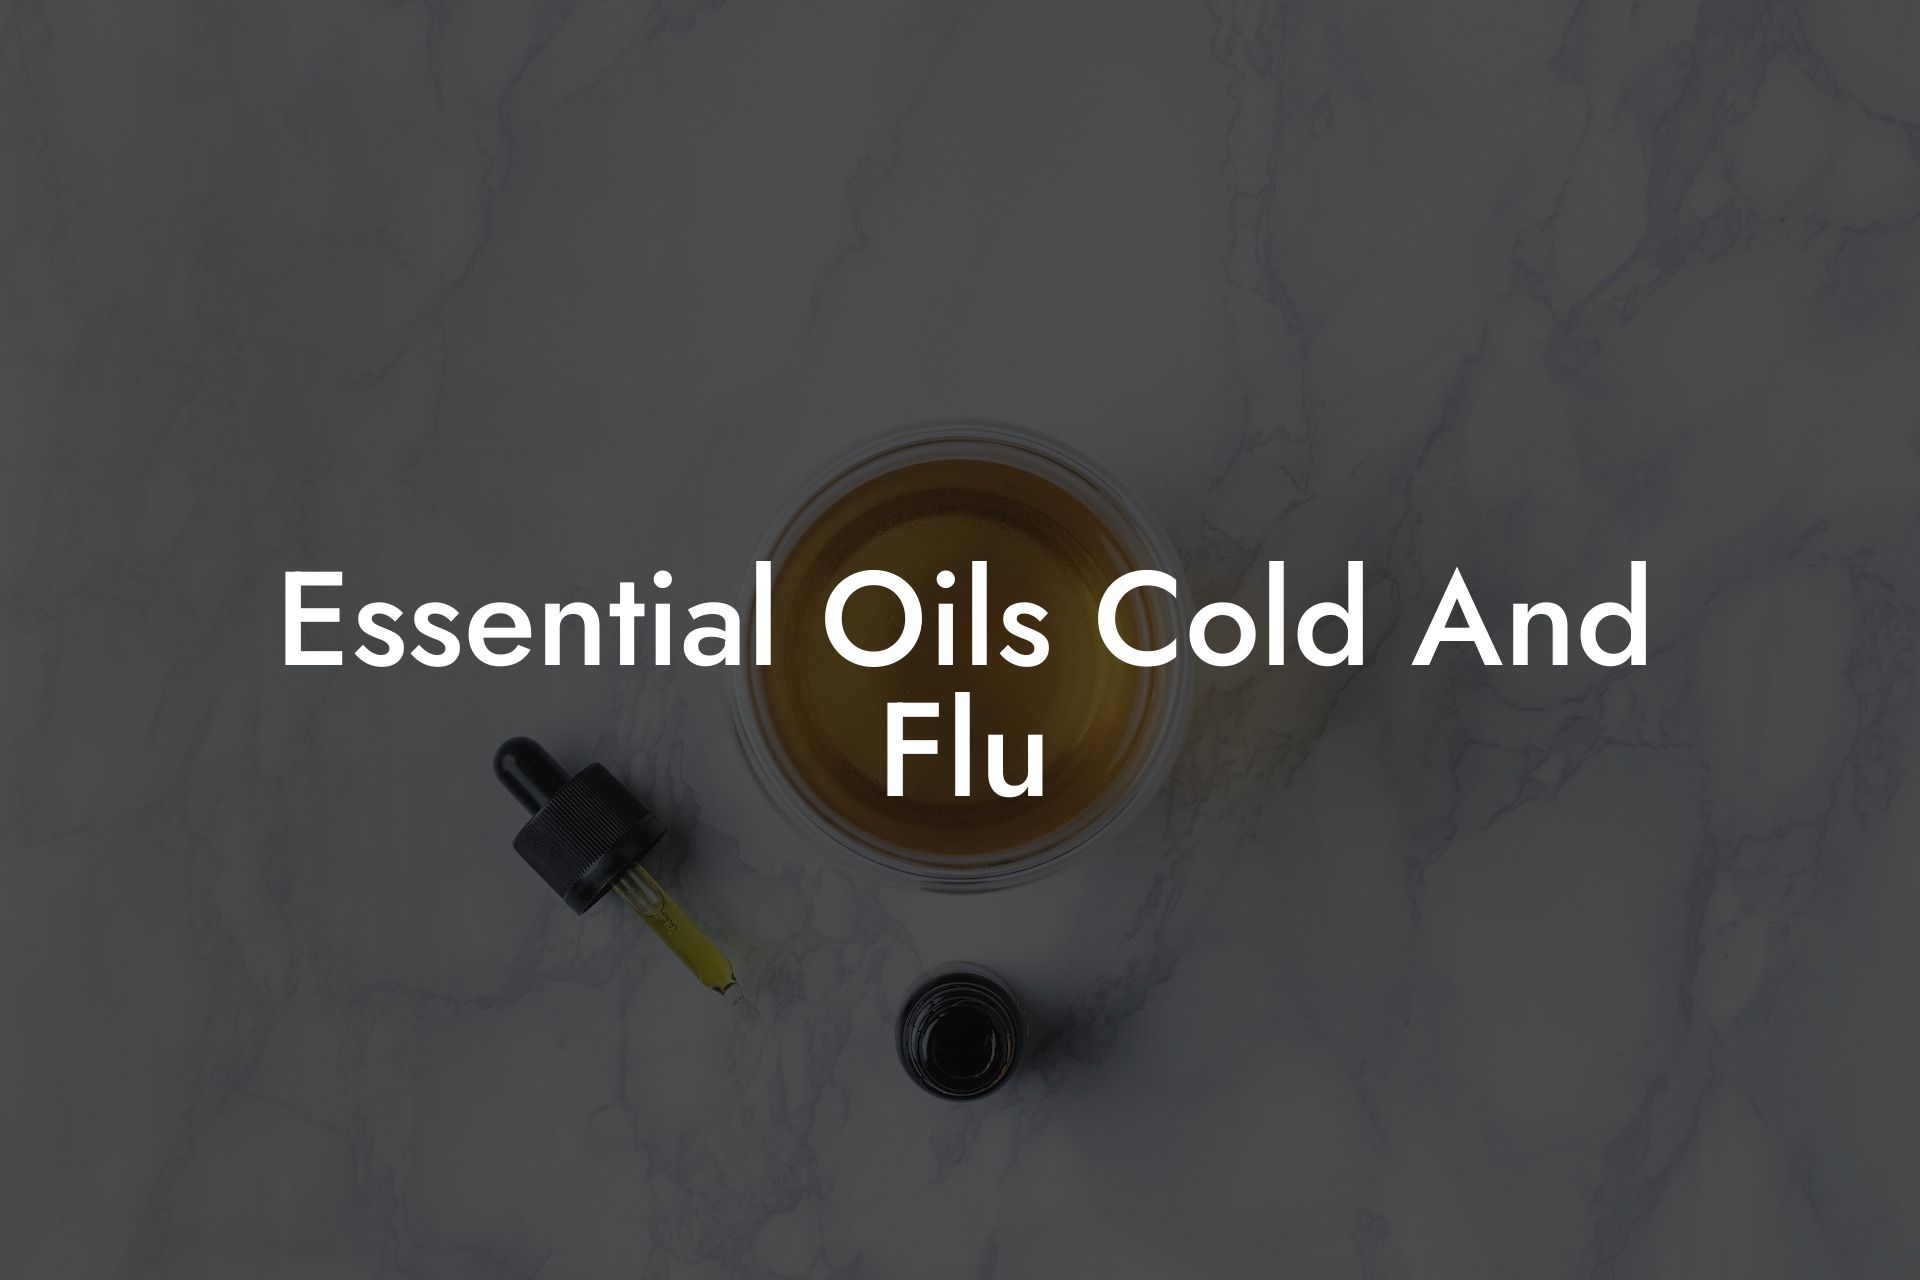 Essential Oils Cold And Flu